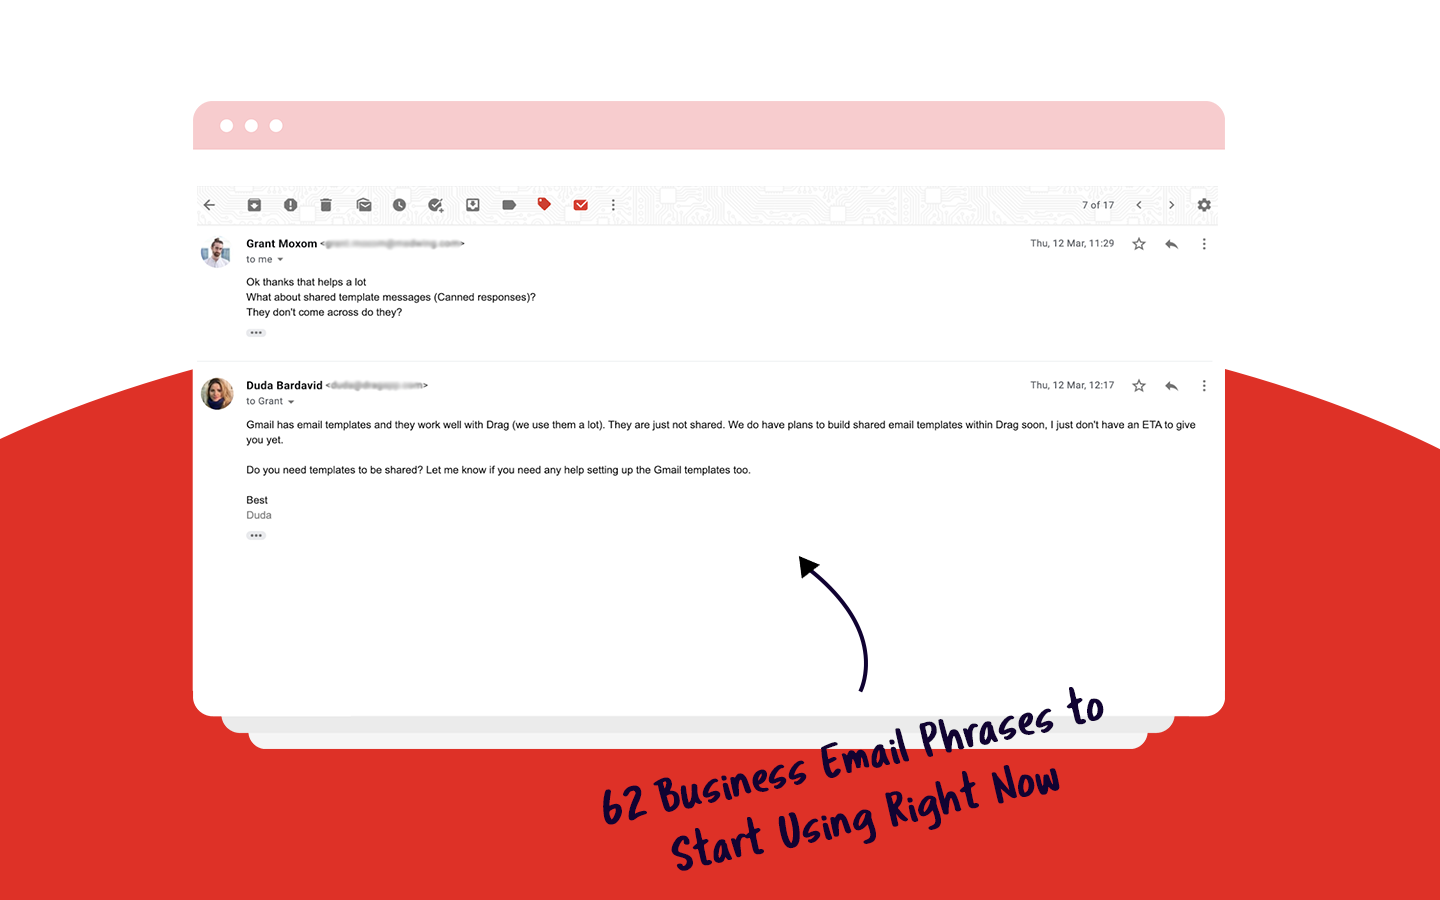 25 Business Email Phrases to Start Using Right Now  DragApp.com